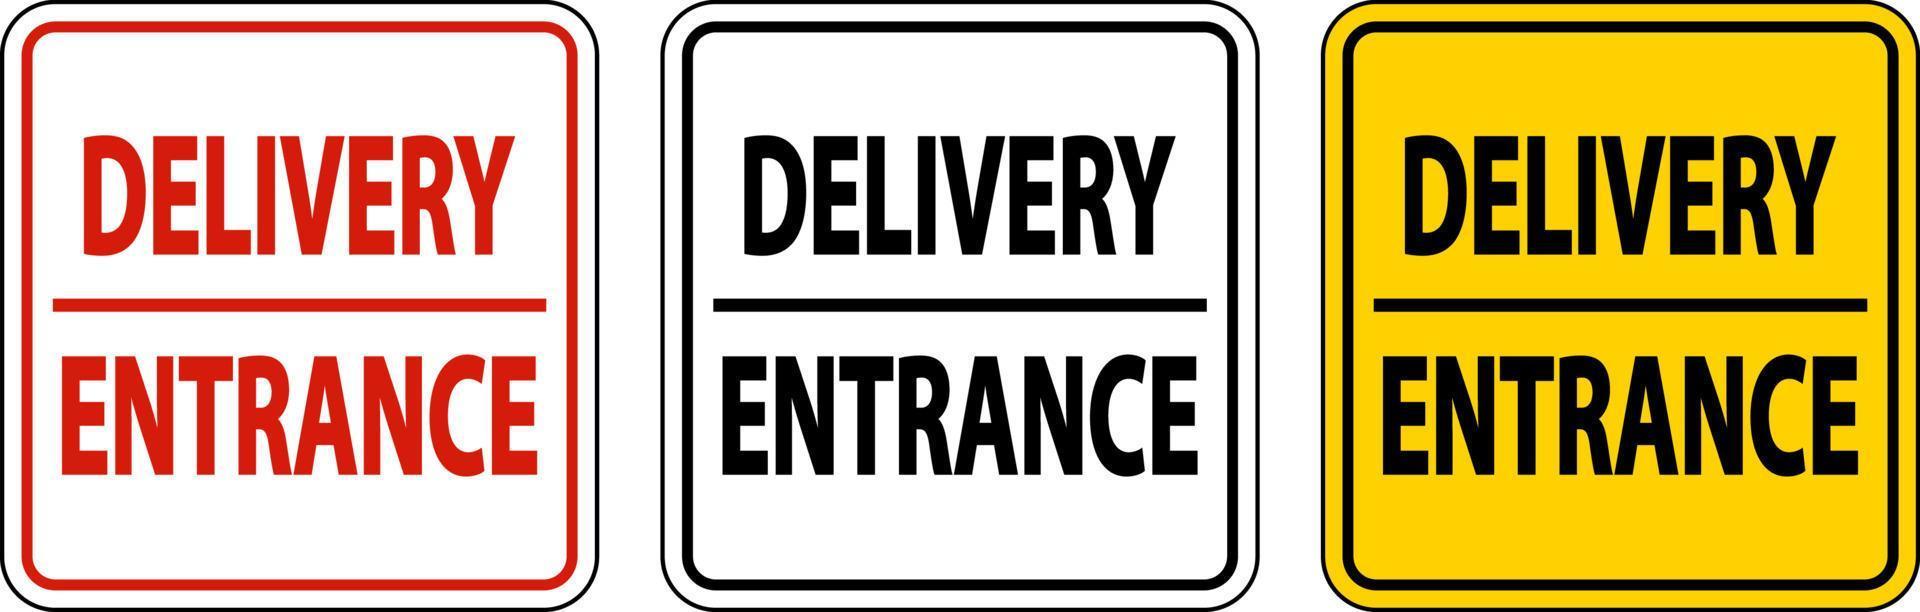 Delivery Entrance Sign On White Background vector